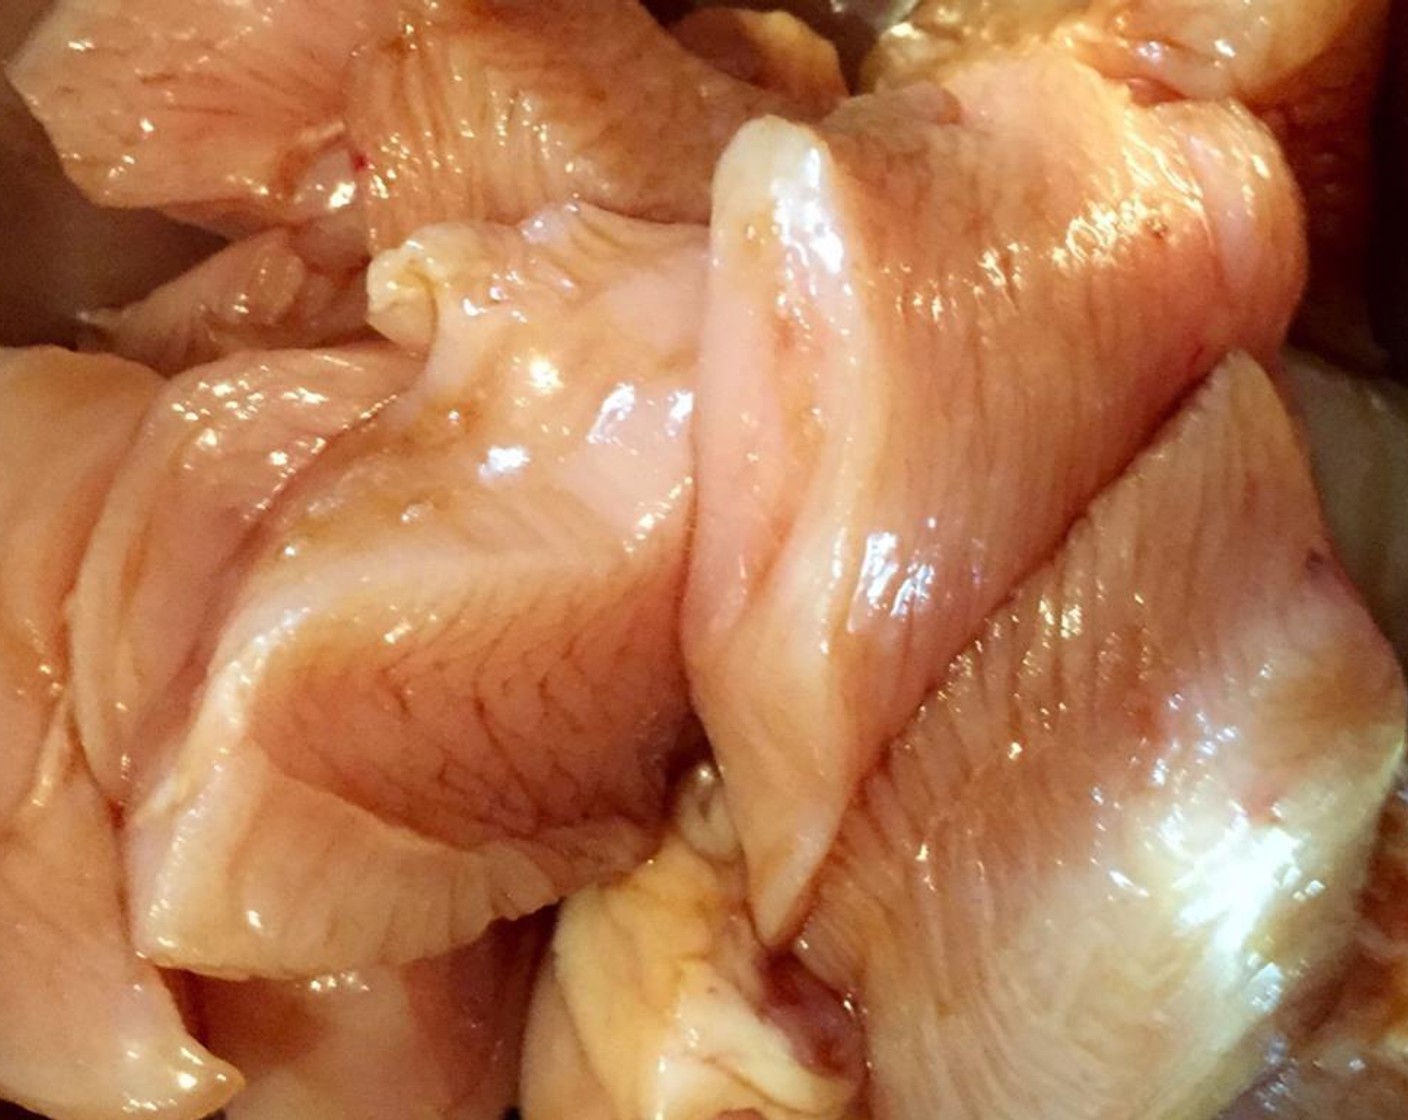 step 2 Remove any excess fat from the Chicken Thighs (16 oz) and cut into six or seven pieces, and put in a bowl. Sprinkle one tablespoon of Granulated Sugar (1/4 cup) and one tablespoon of Soy Sauce (1/4 cup) and mix. Let it sit in marinade until ready to cook.